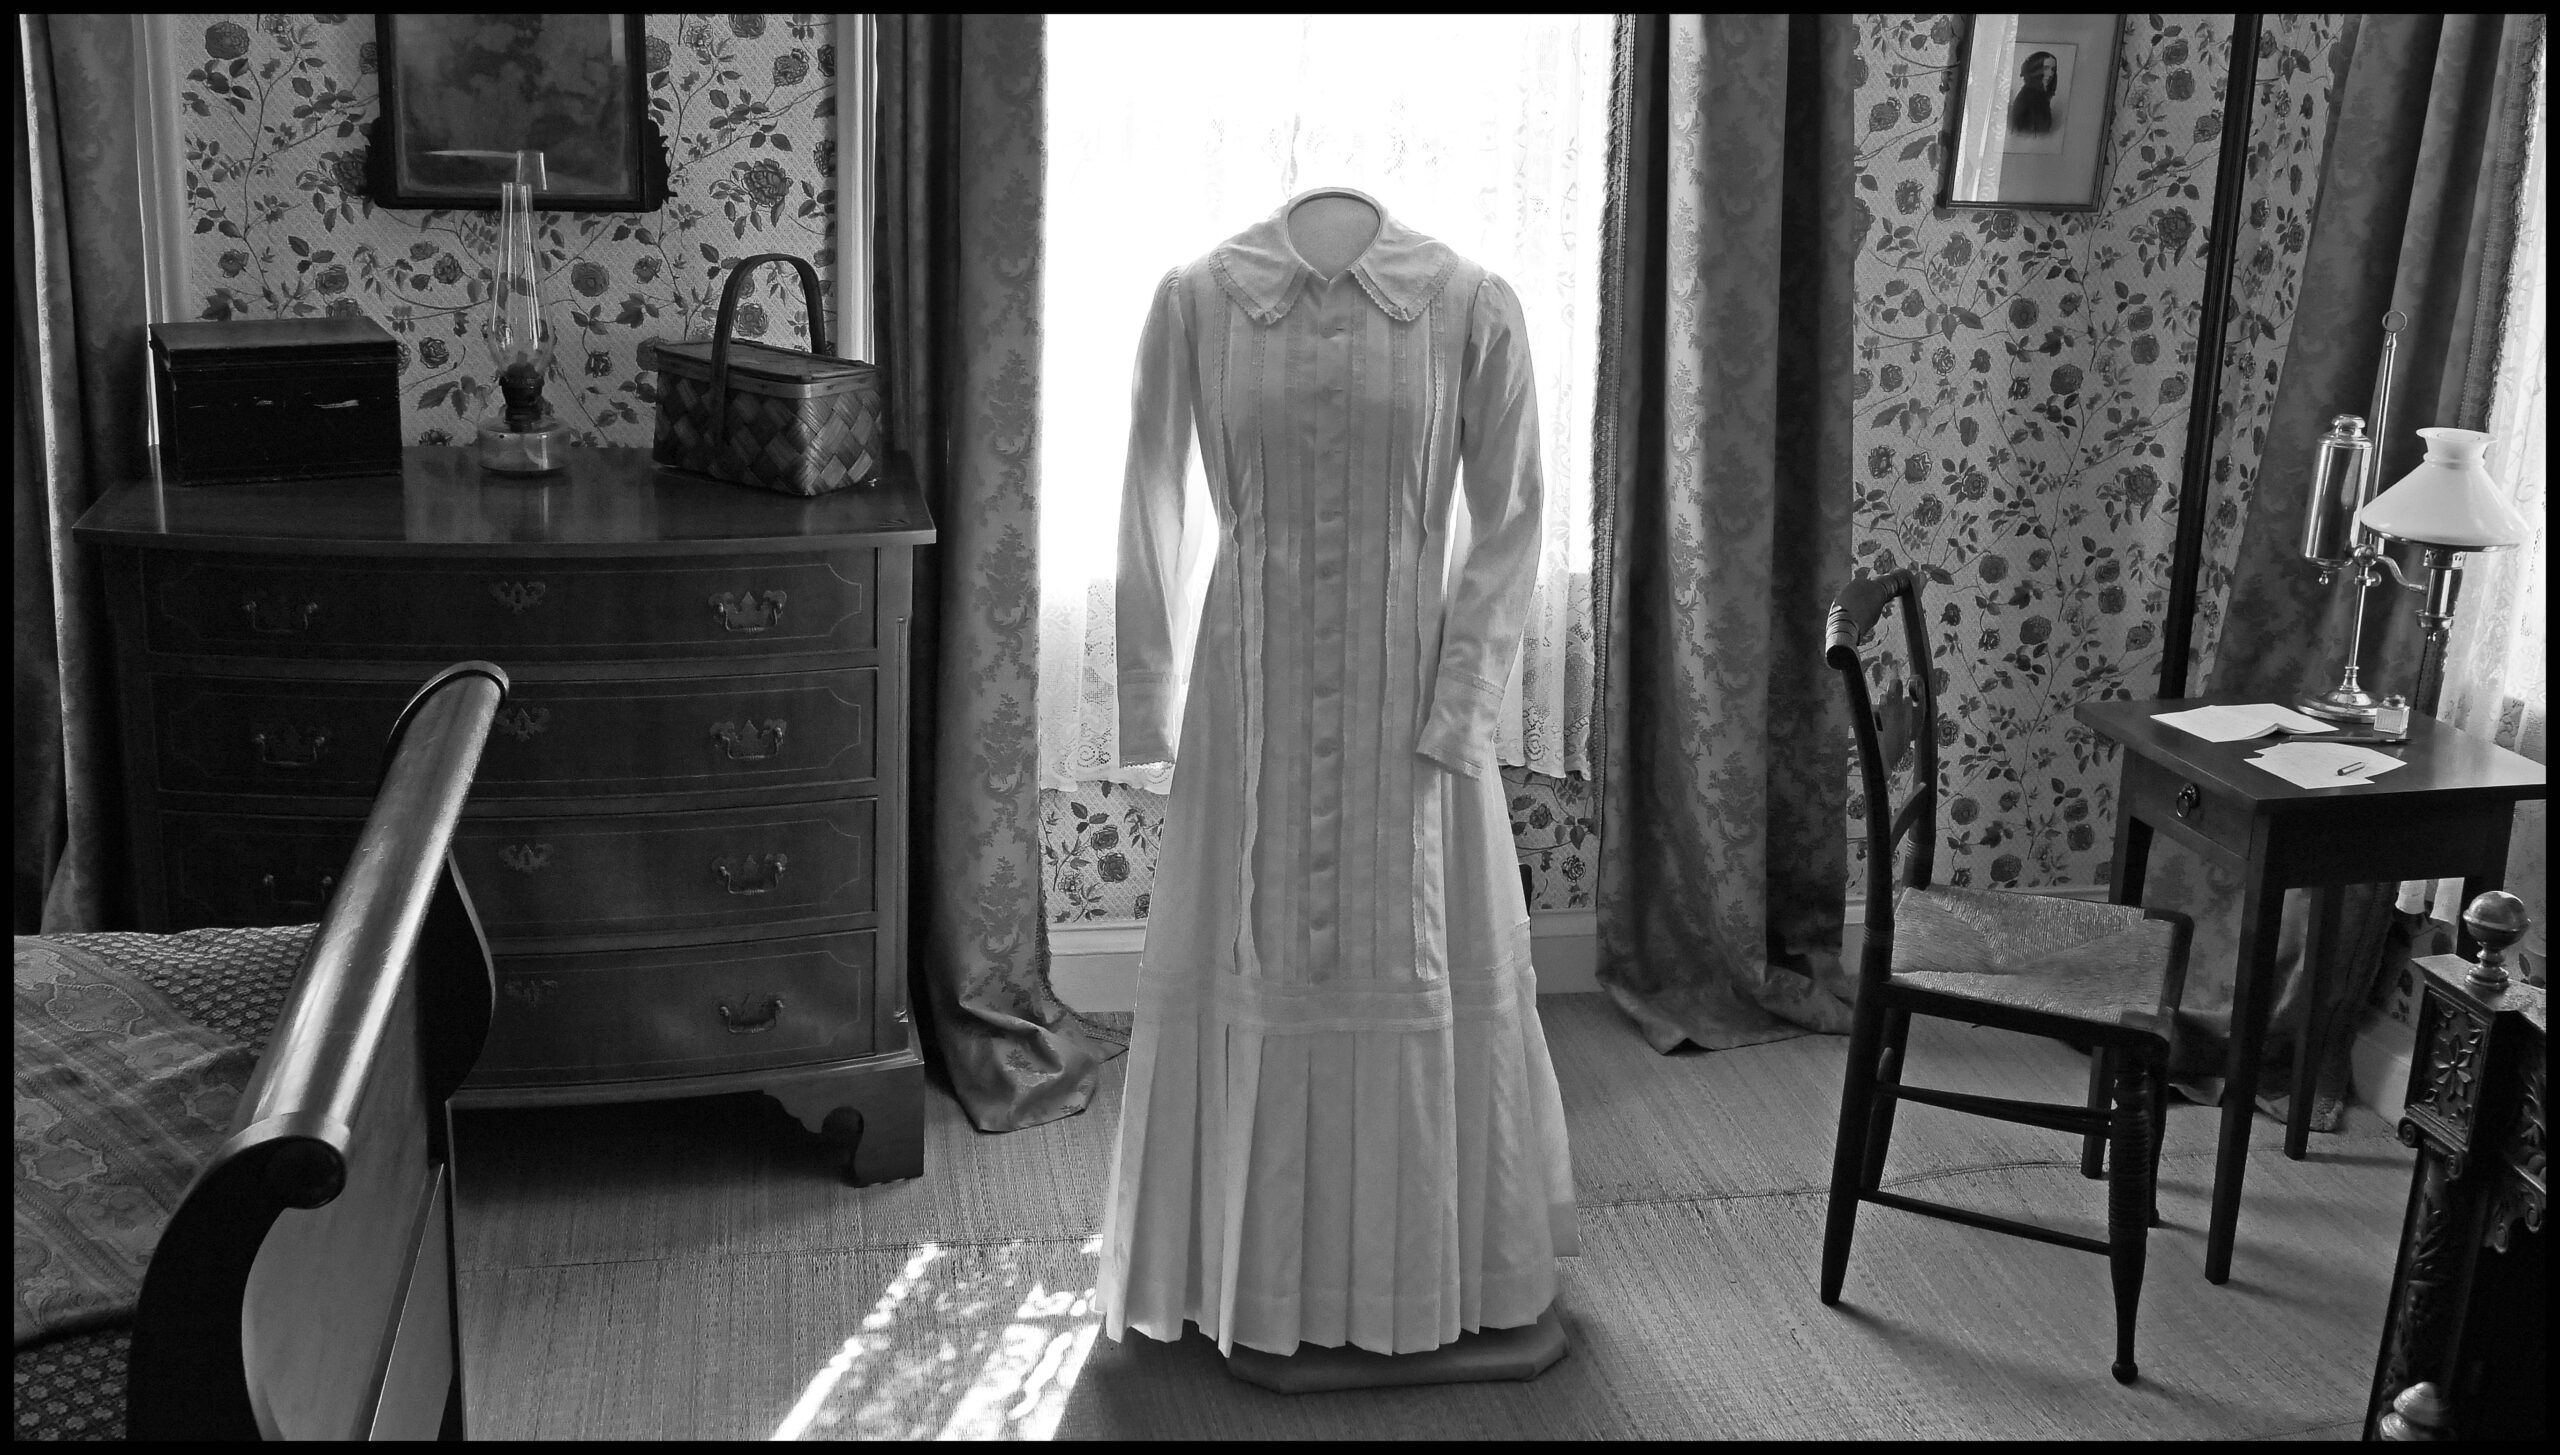 Image of Emily Dickinson's white dress displayed in her bedroom